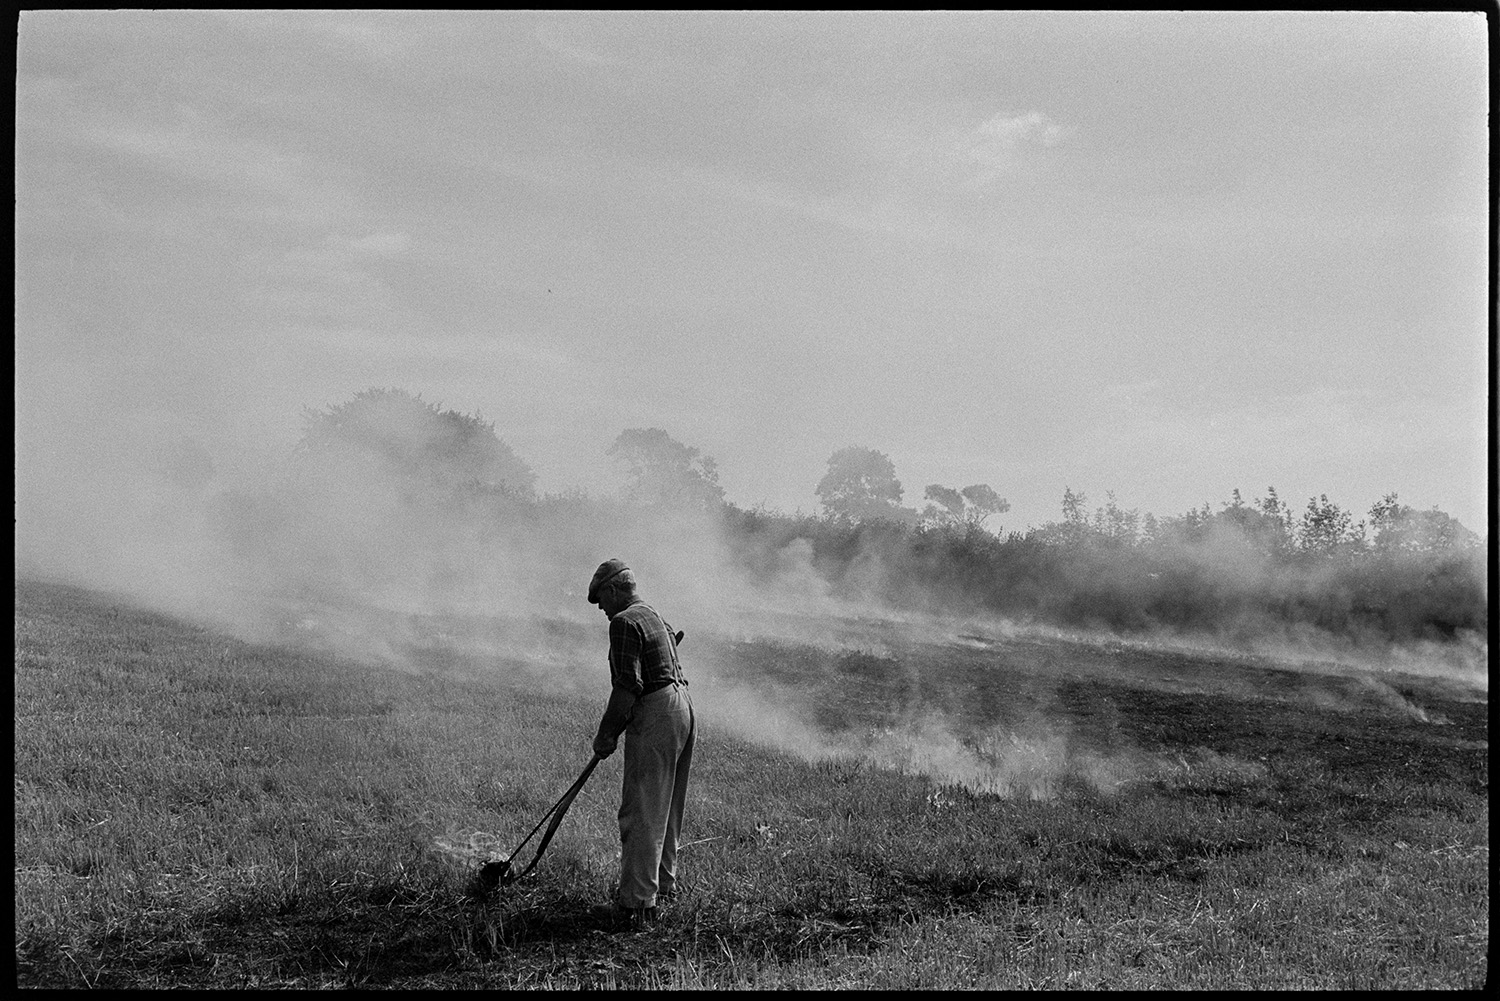 Farmer burning stubble. 
[Alf Pugsley burning stubble in a field at Lower Langham, Dolton. Smoke is rising from the field.]